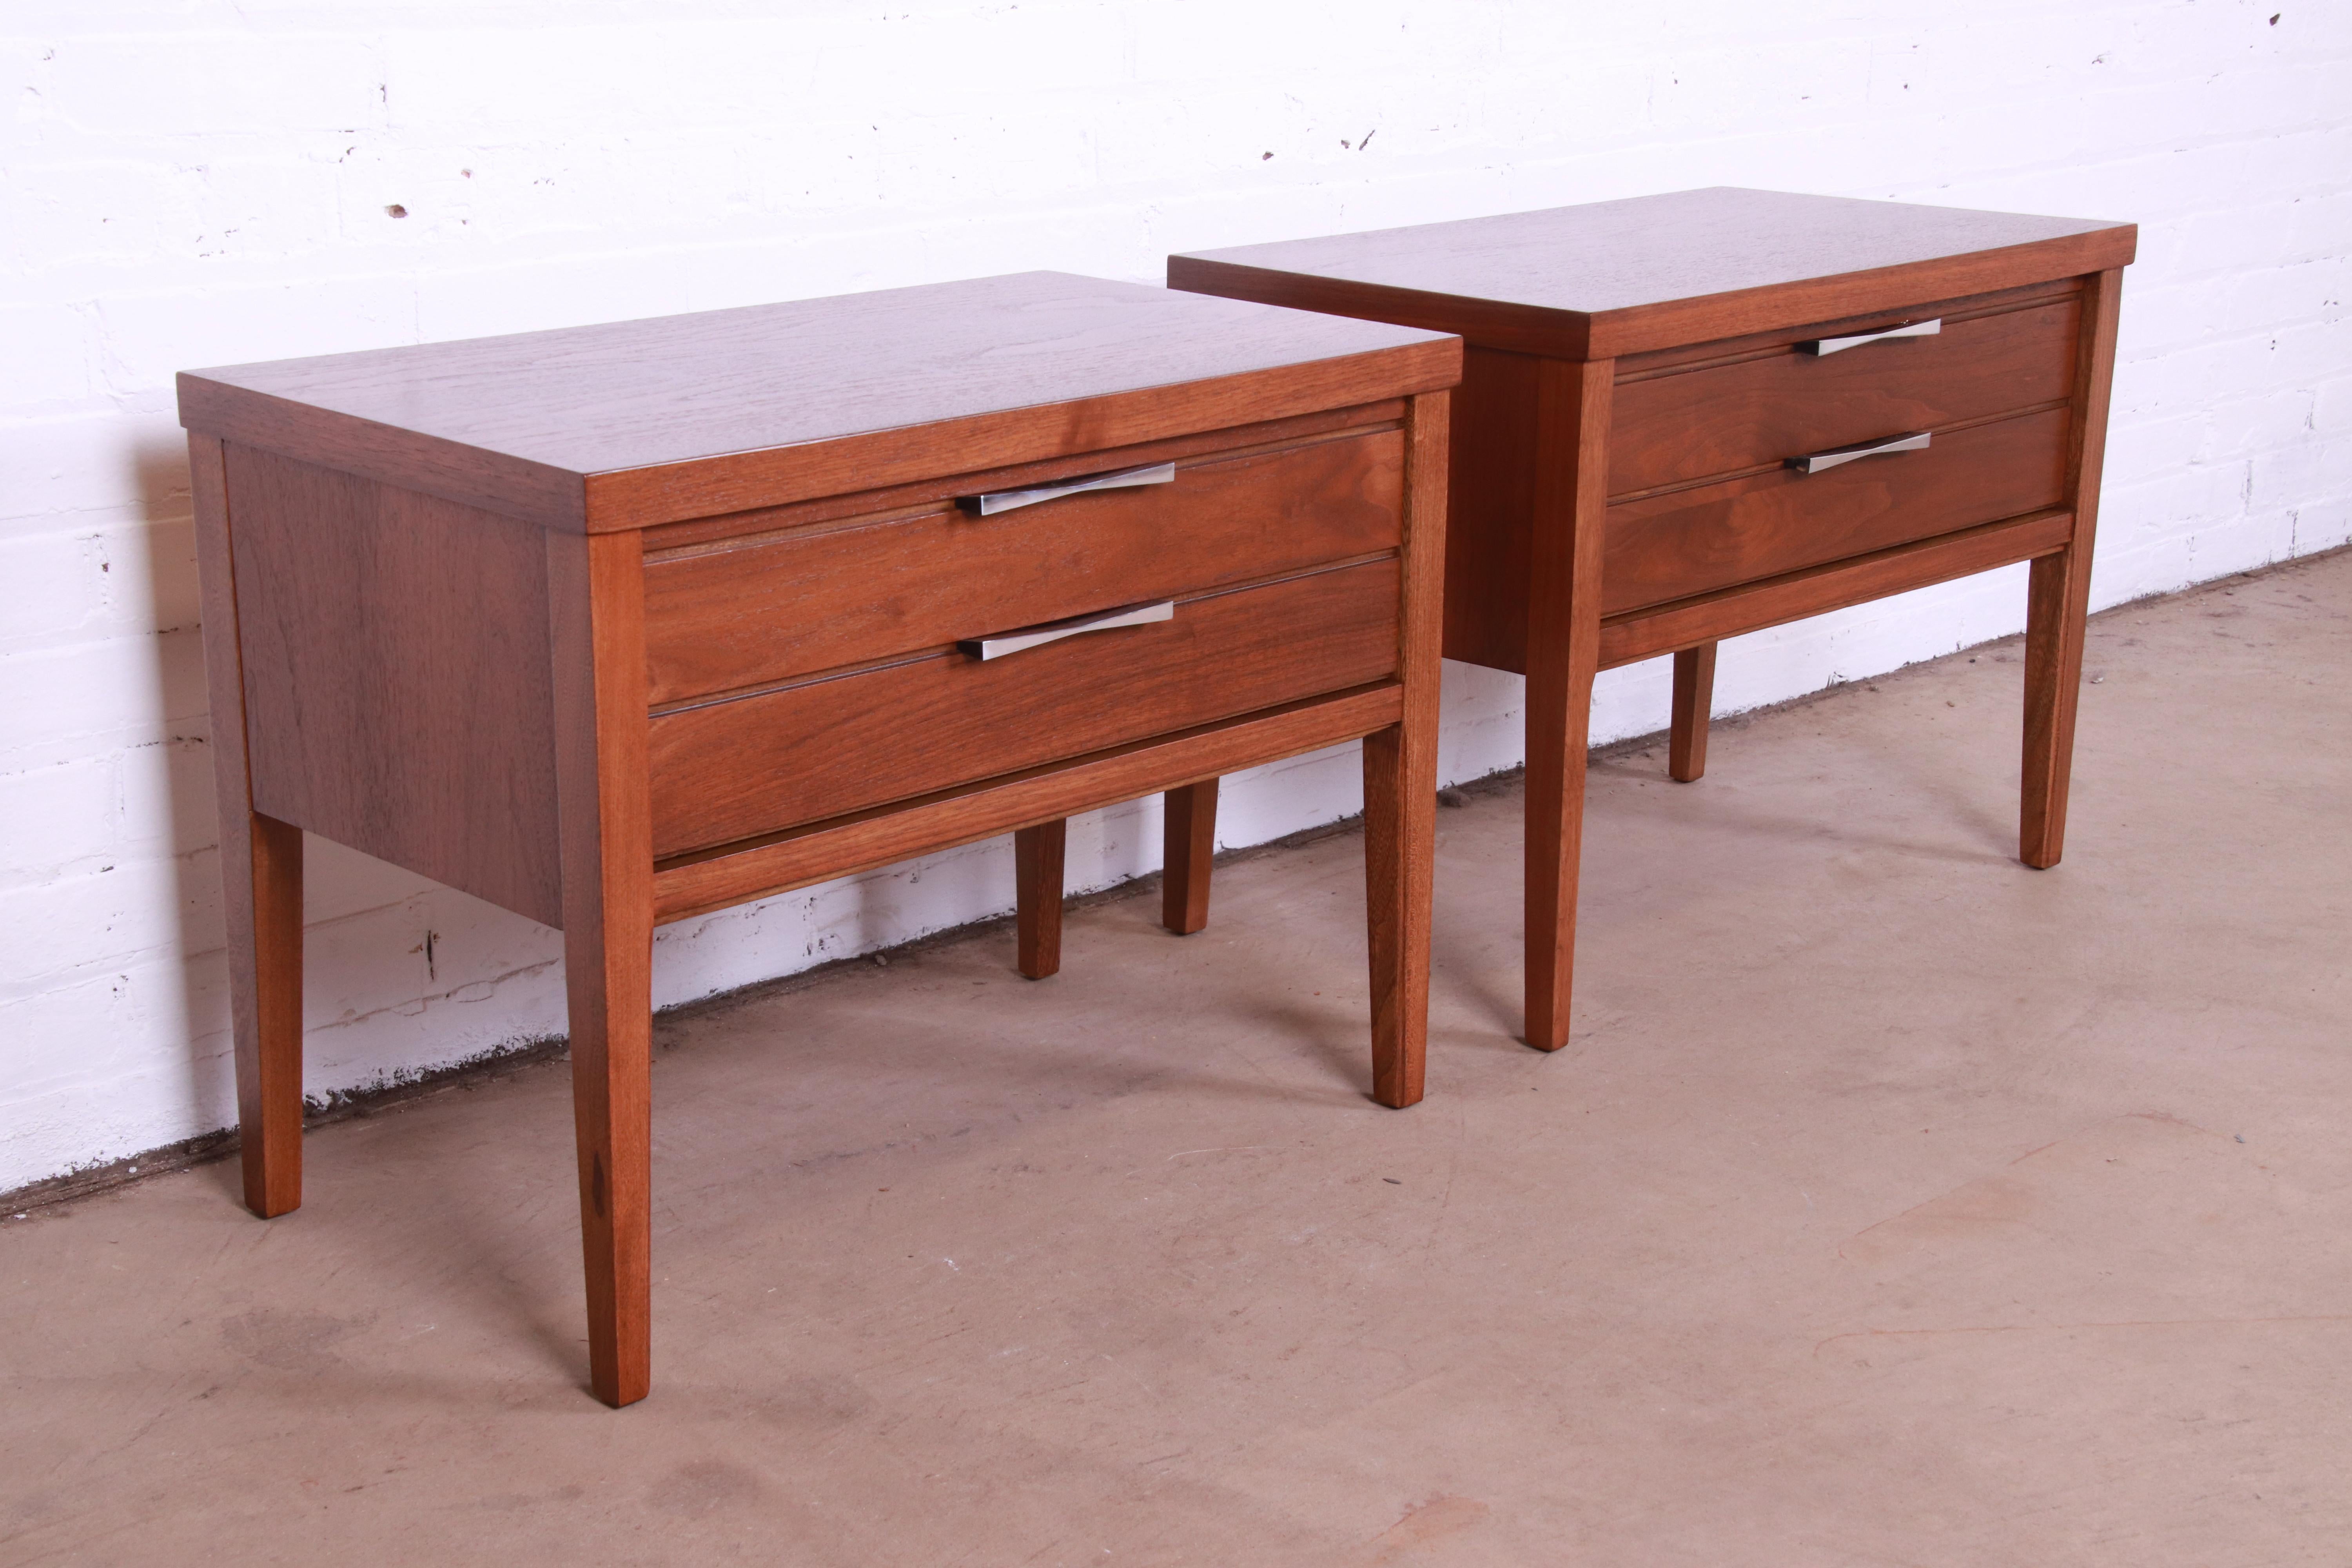 Mid-20th Century Lane Tuxedo Mid-Century Modern Walnut and Rosewood Nightstands, Newly Refinished